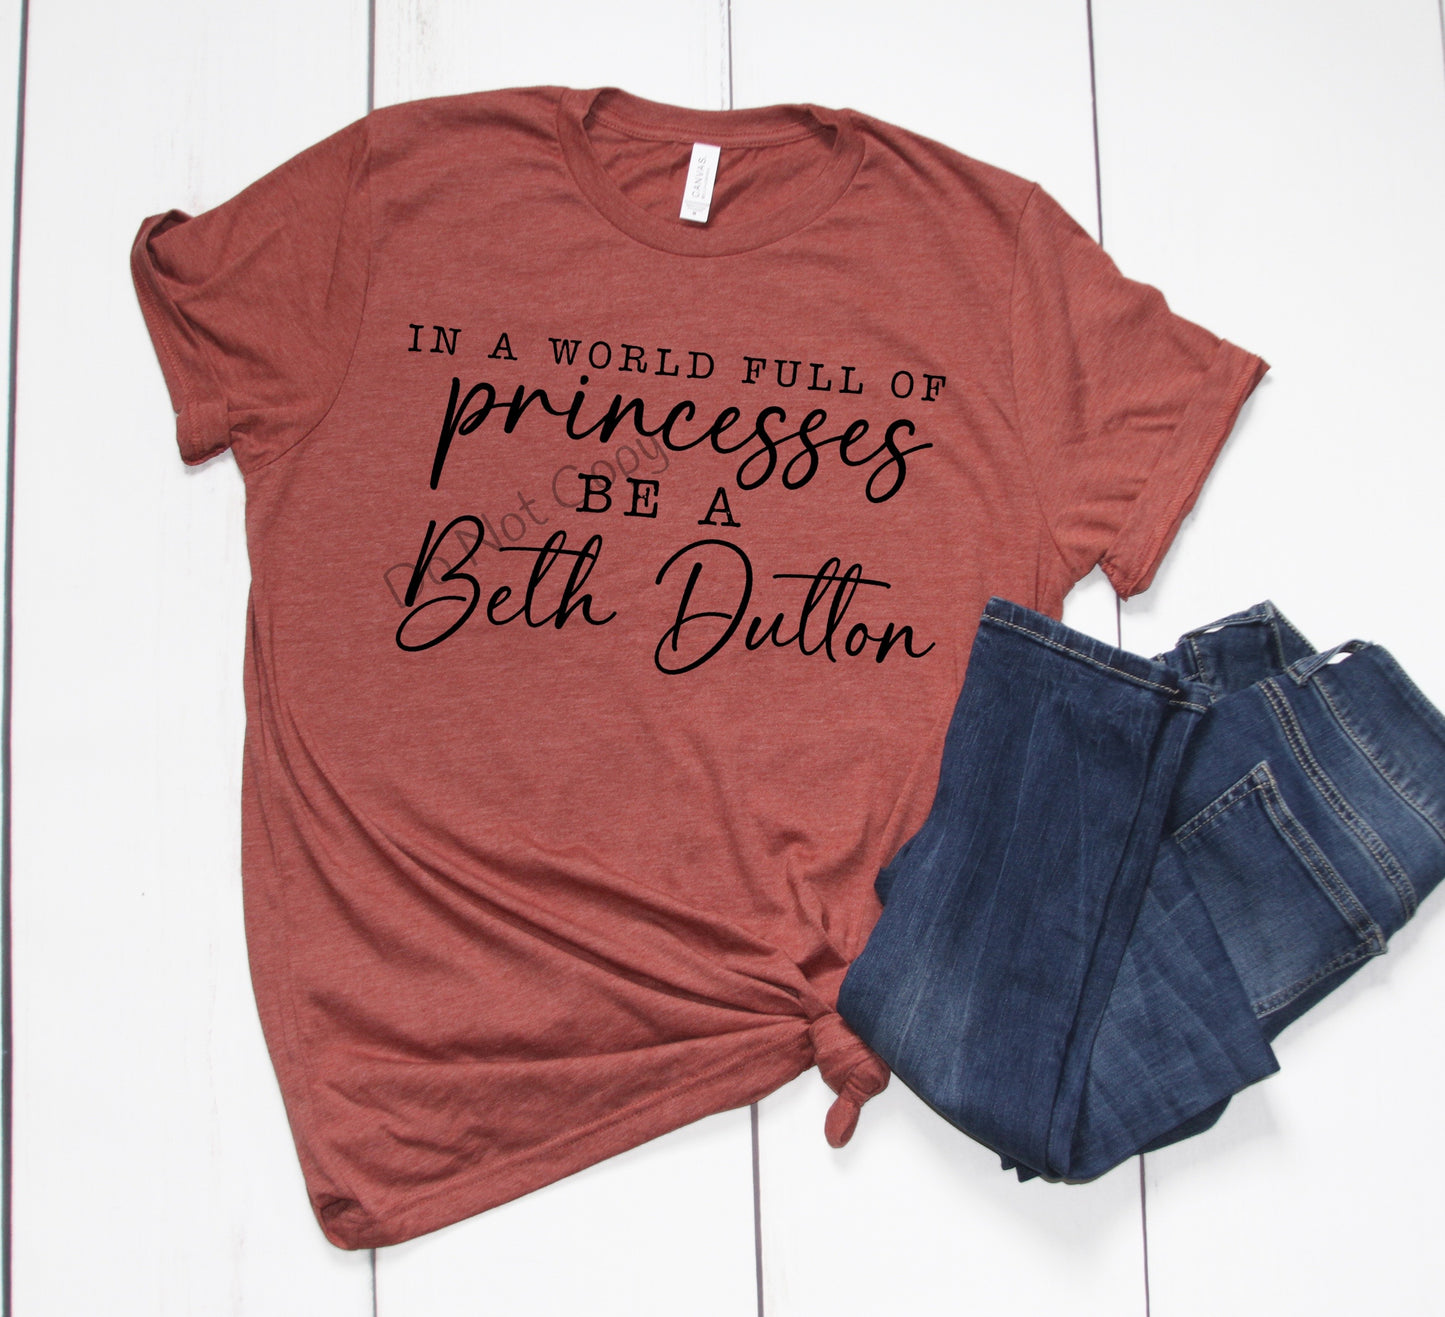 In a world full of princesses be a Beth-DTF